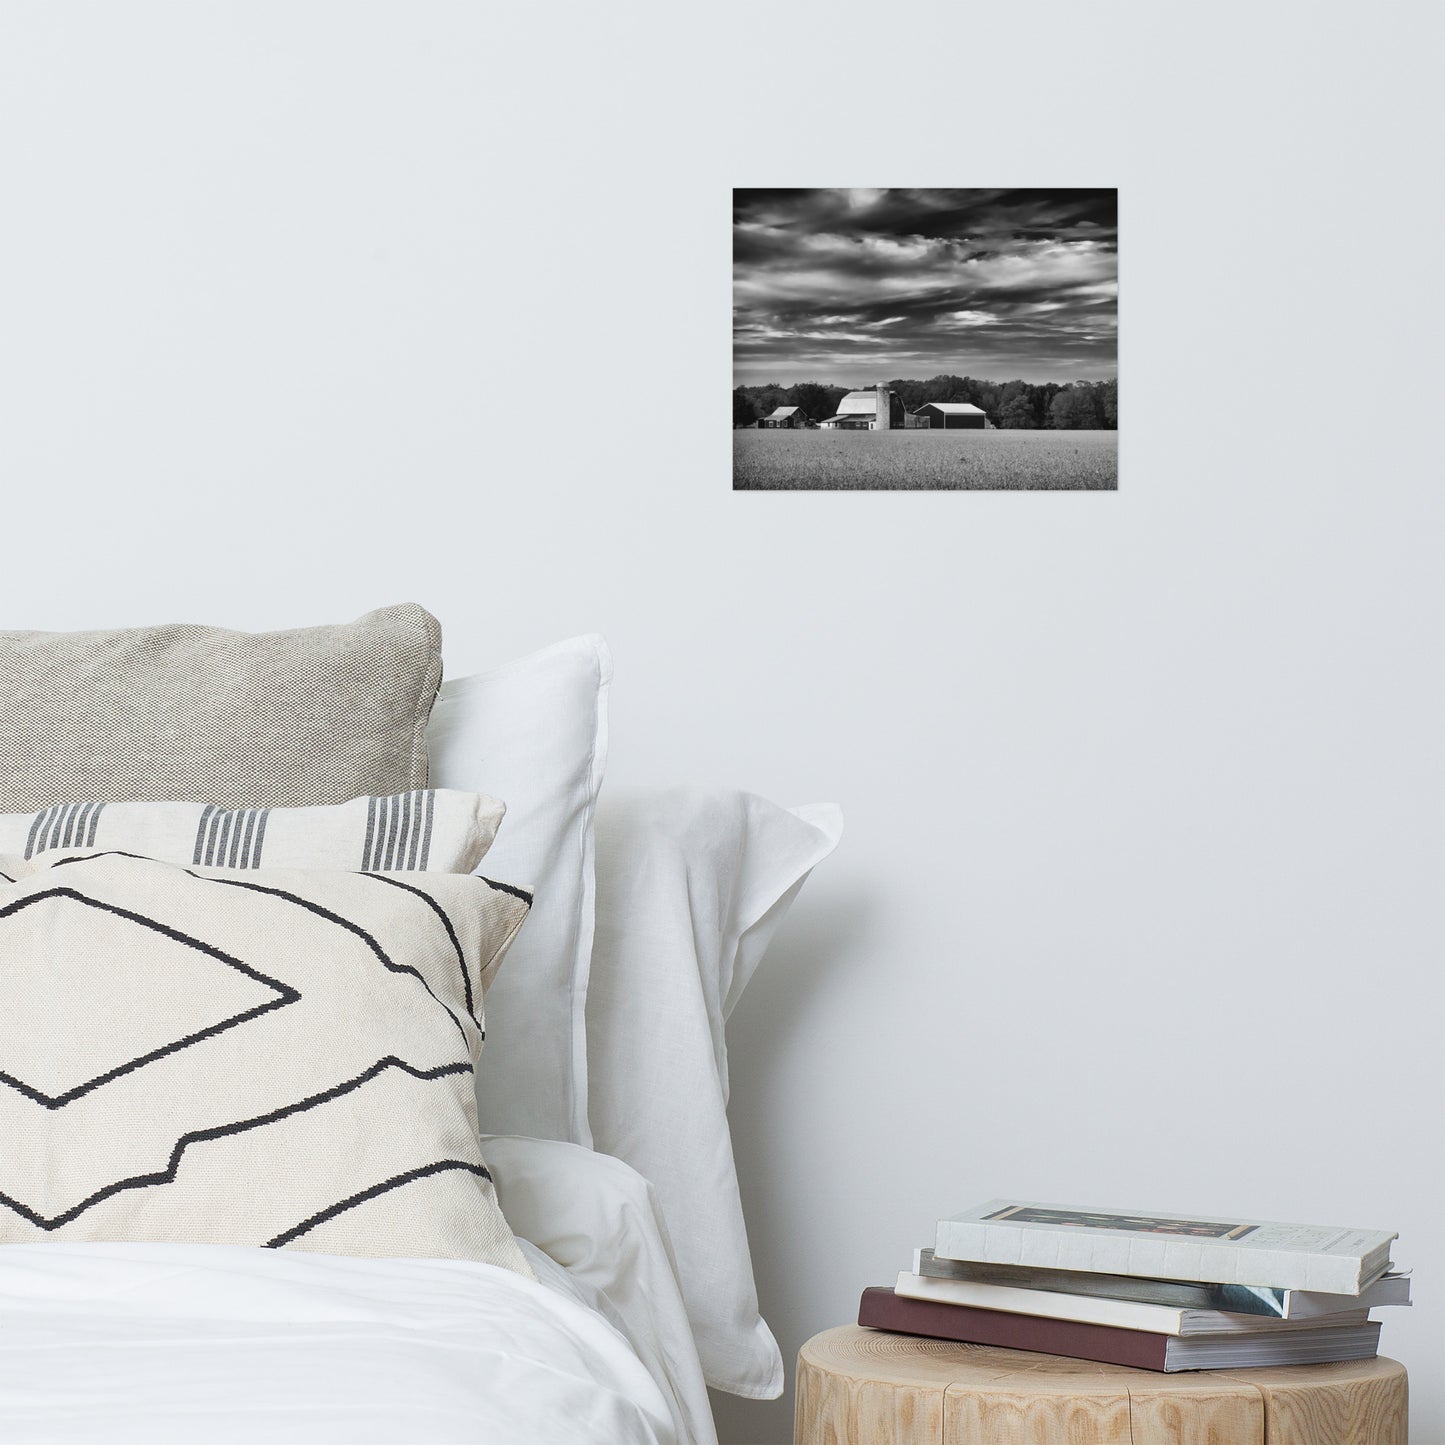 Barn in Field Black and White Landscape Photo Loose Wall Art Prints